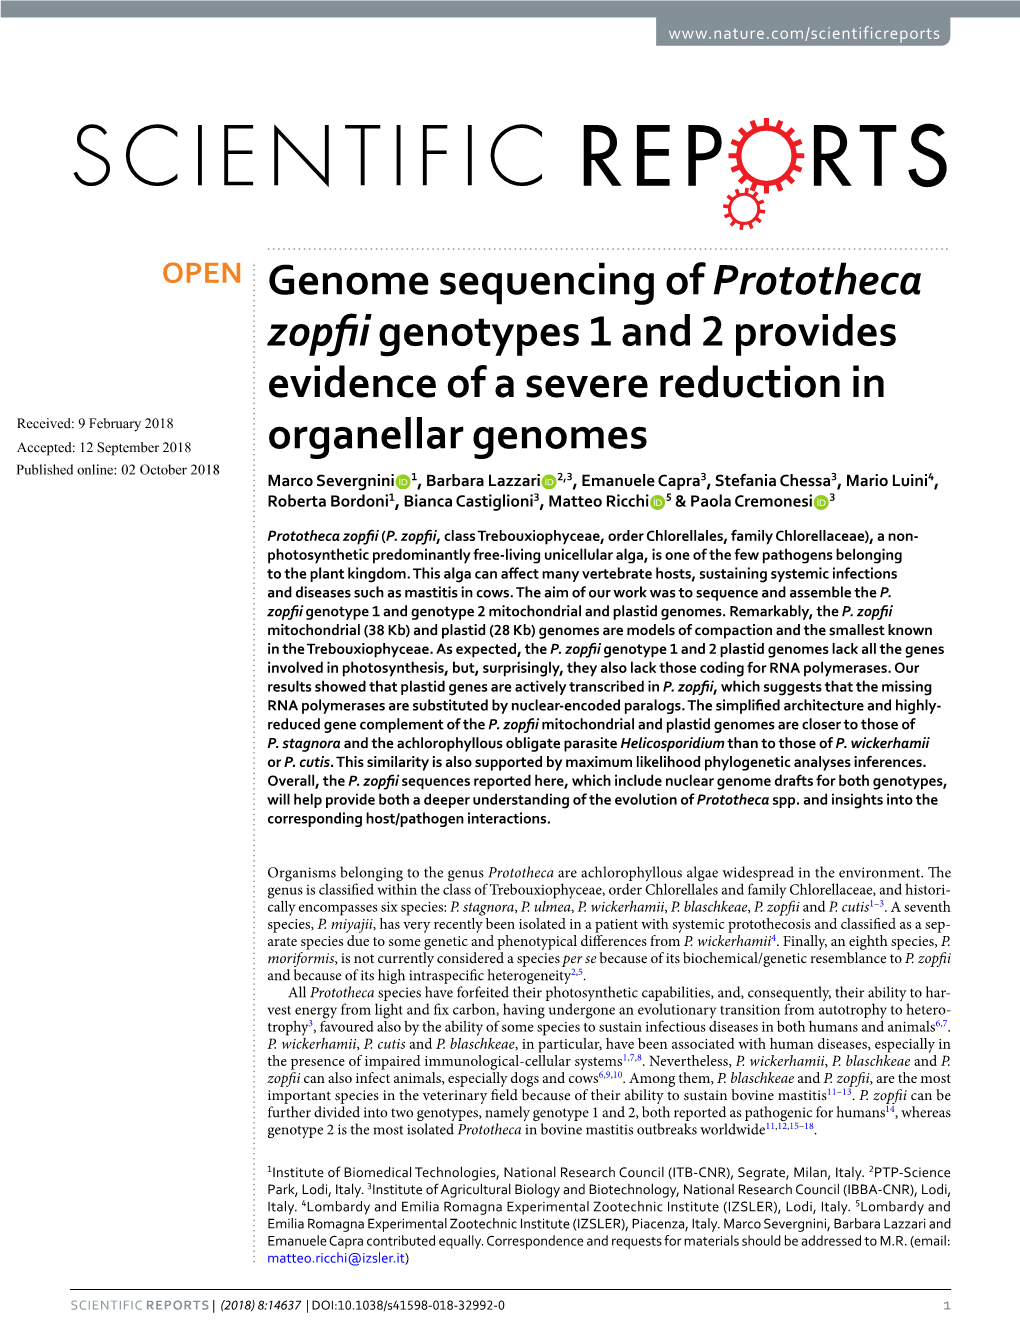 Genome Sequencing of Prototheca Zopfii Genotypes 1 and 2 Provides